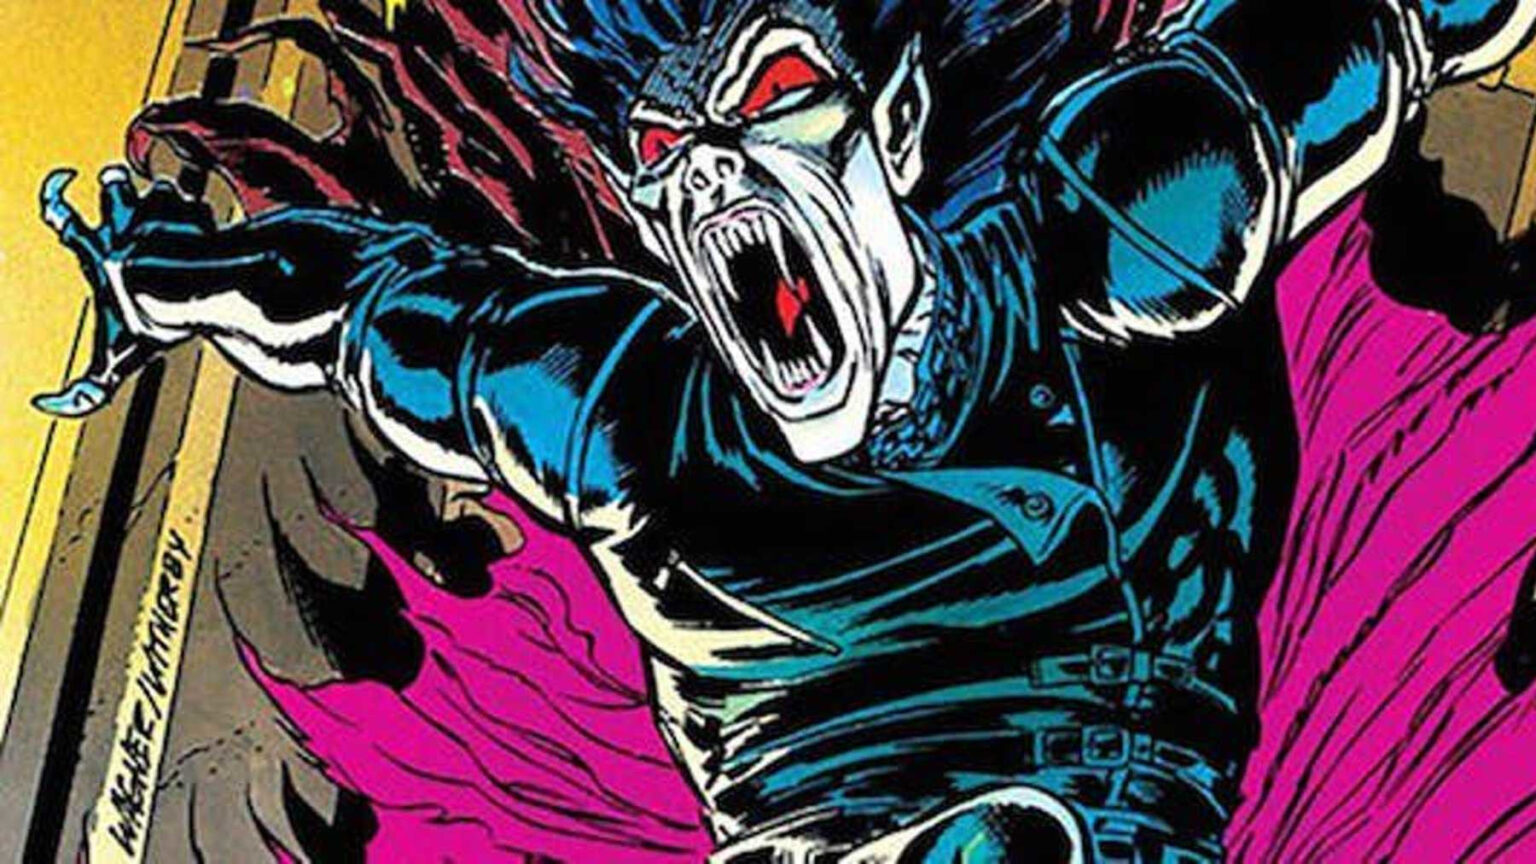 When will 'Morbius' see the light of day? Find out when we'll see Jared Leto as the antihero vampire, and where, right here.